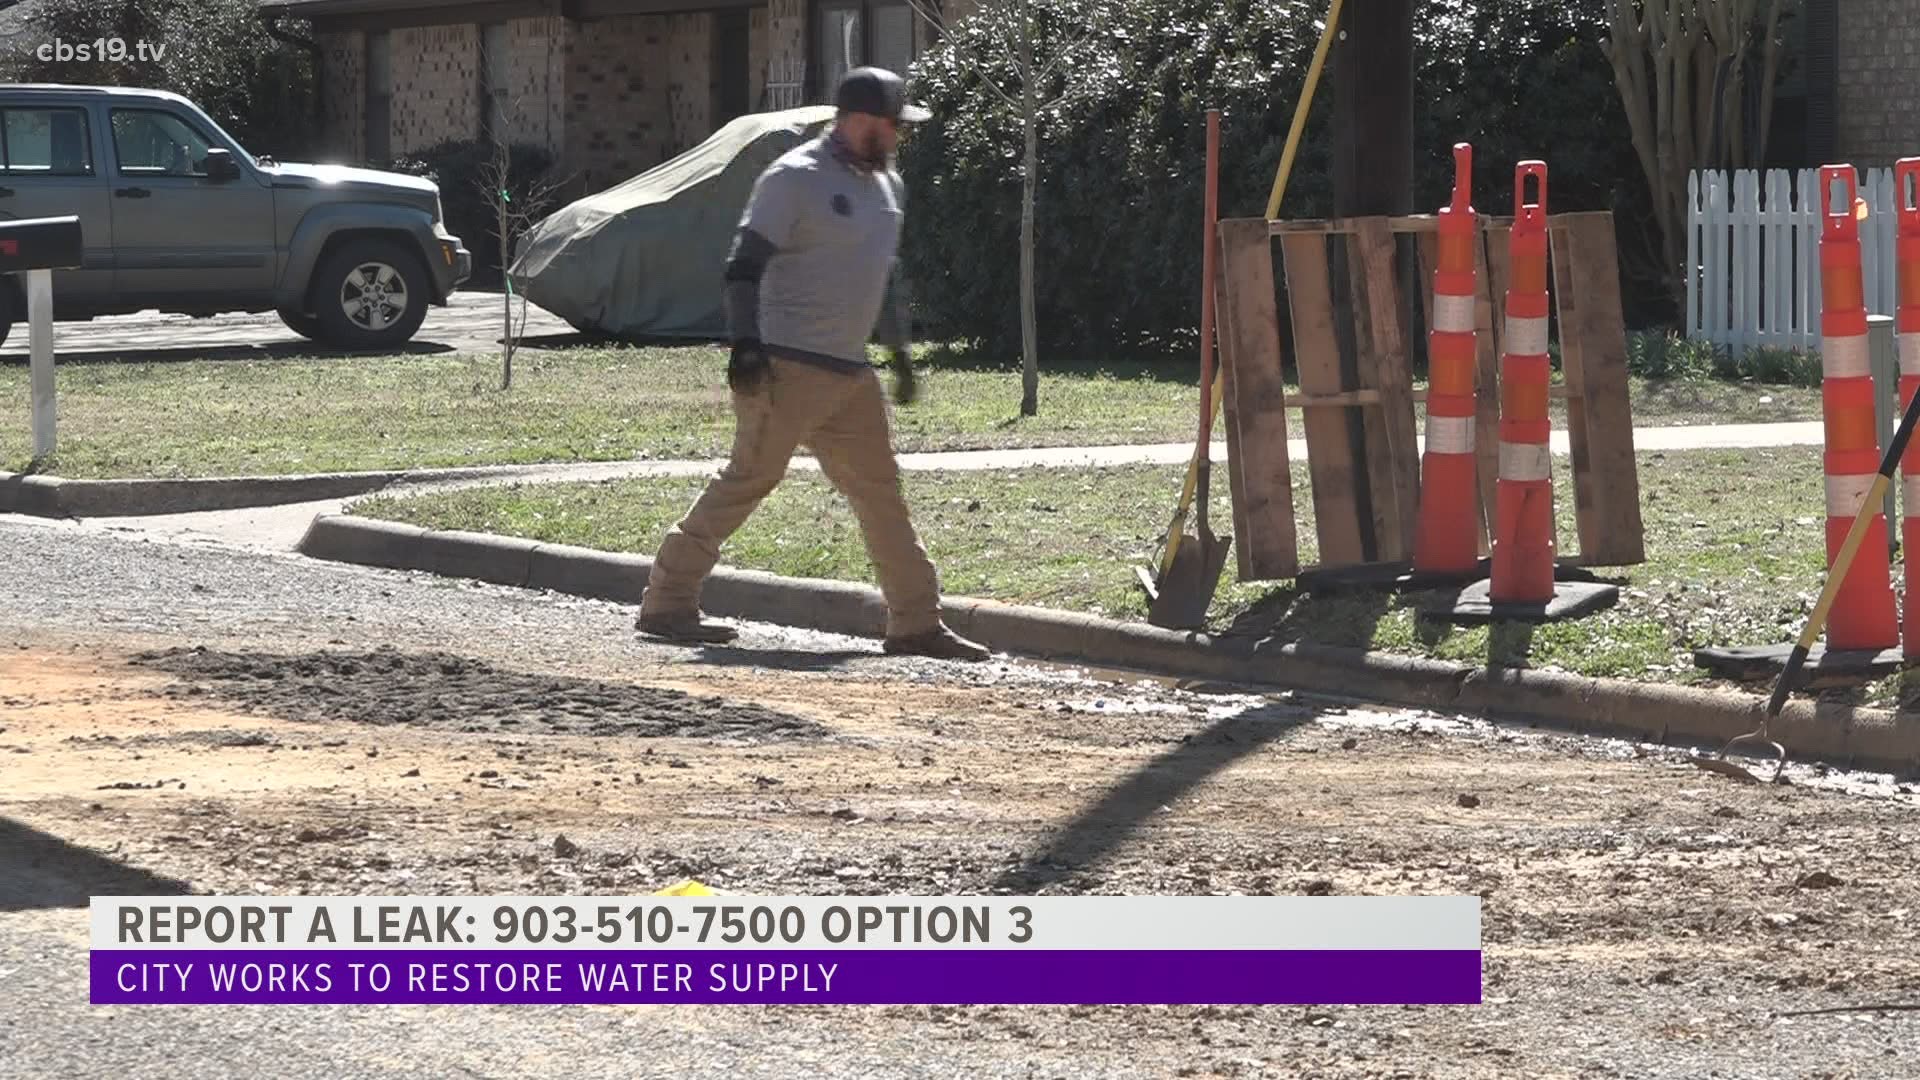 City crews repaired water leaks around the city of Whitehouse to restore water back to its residents.